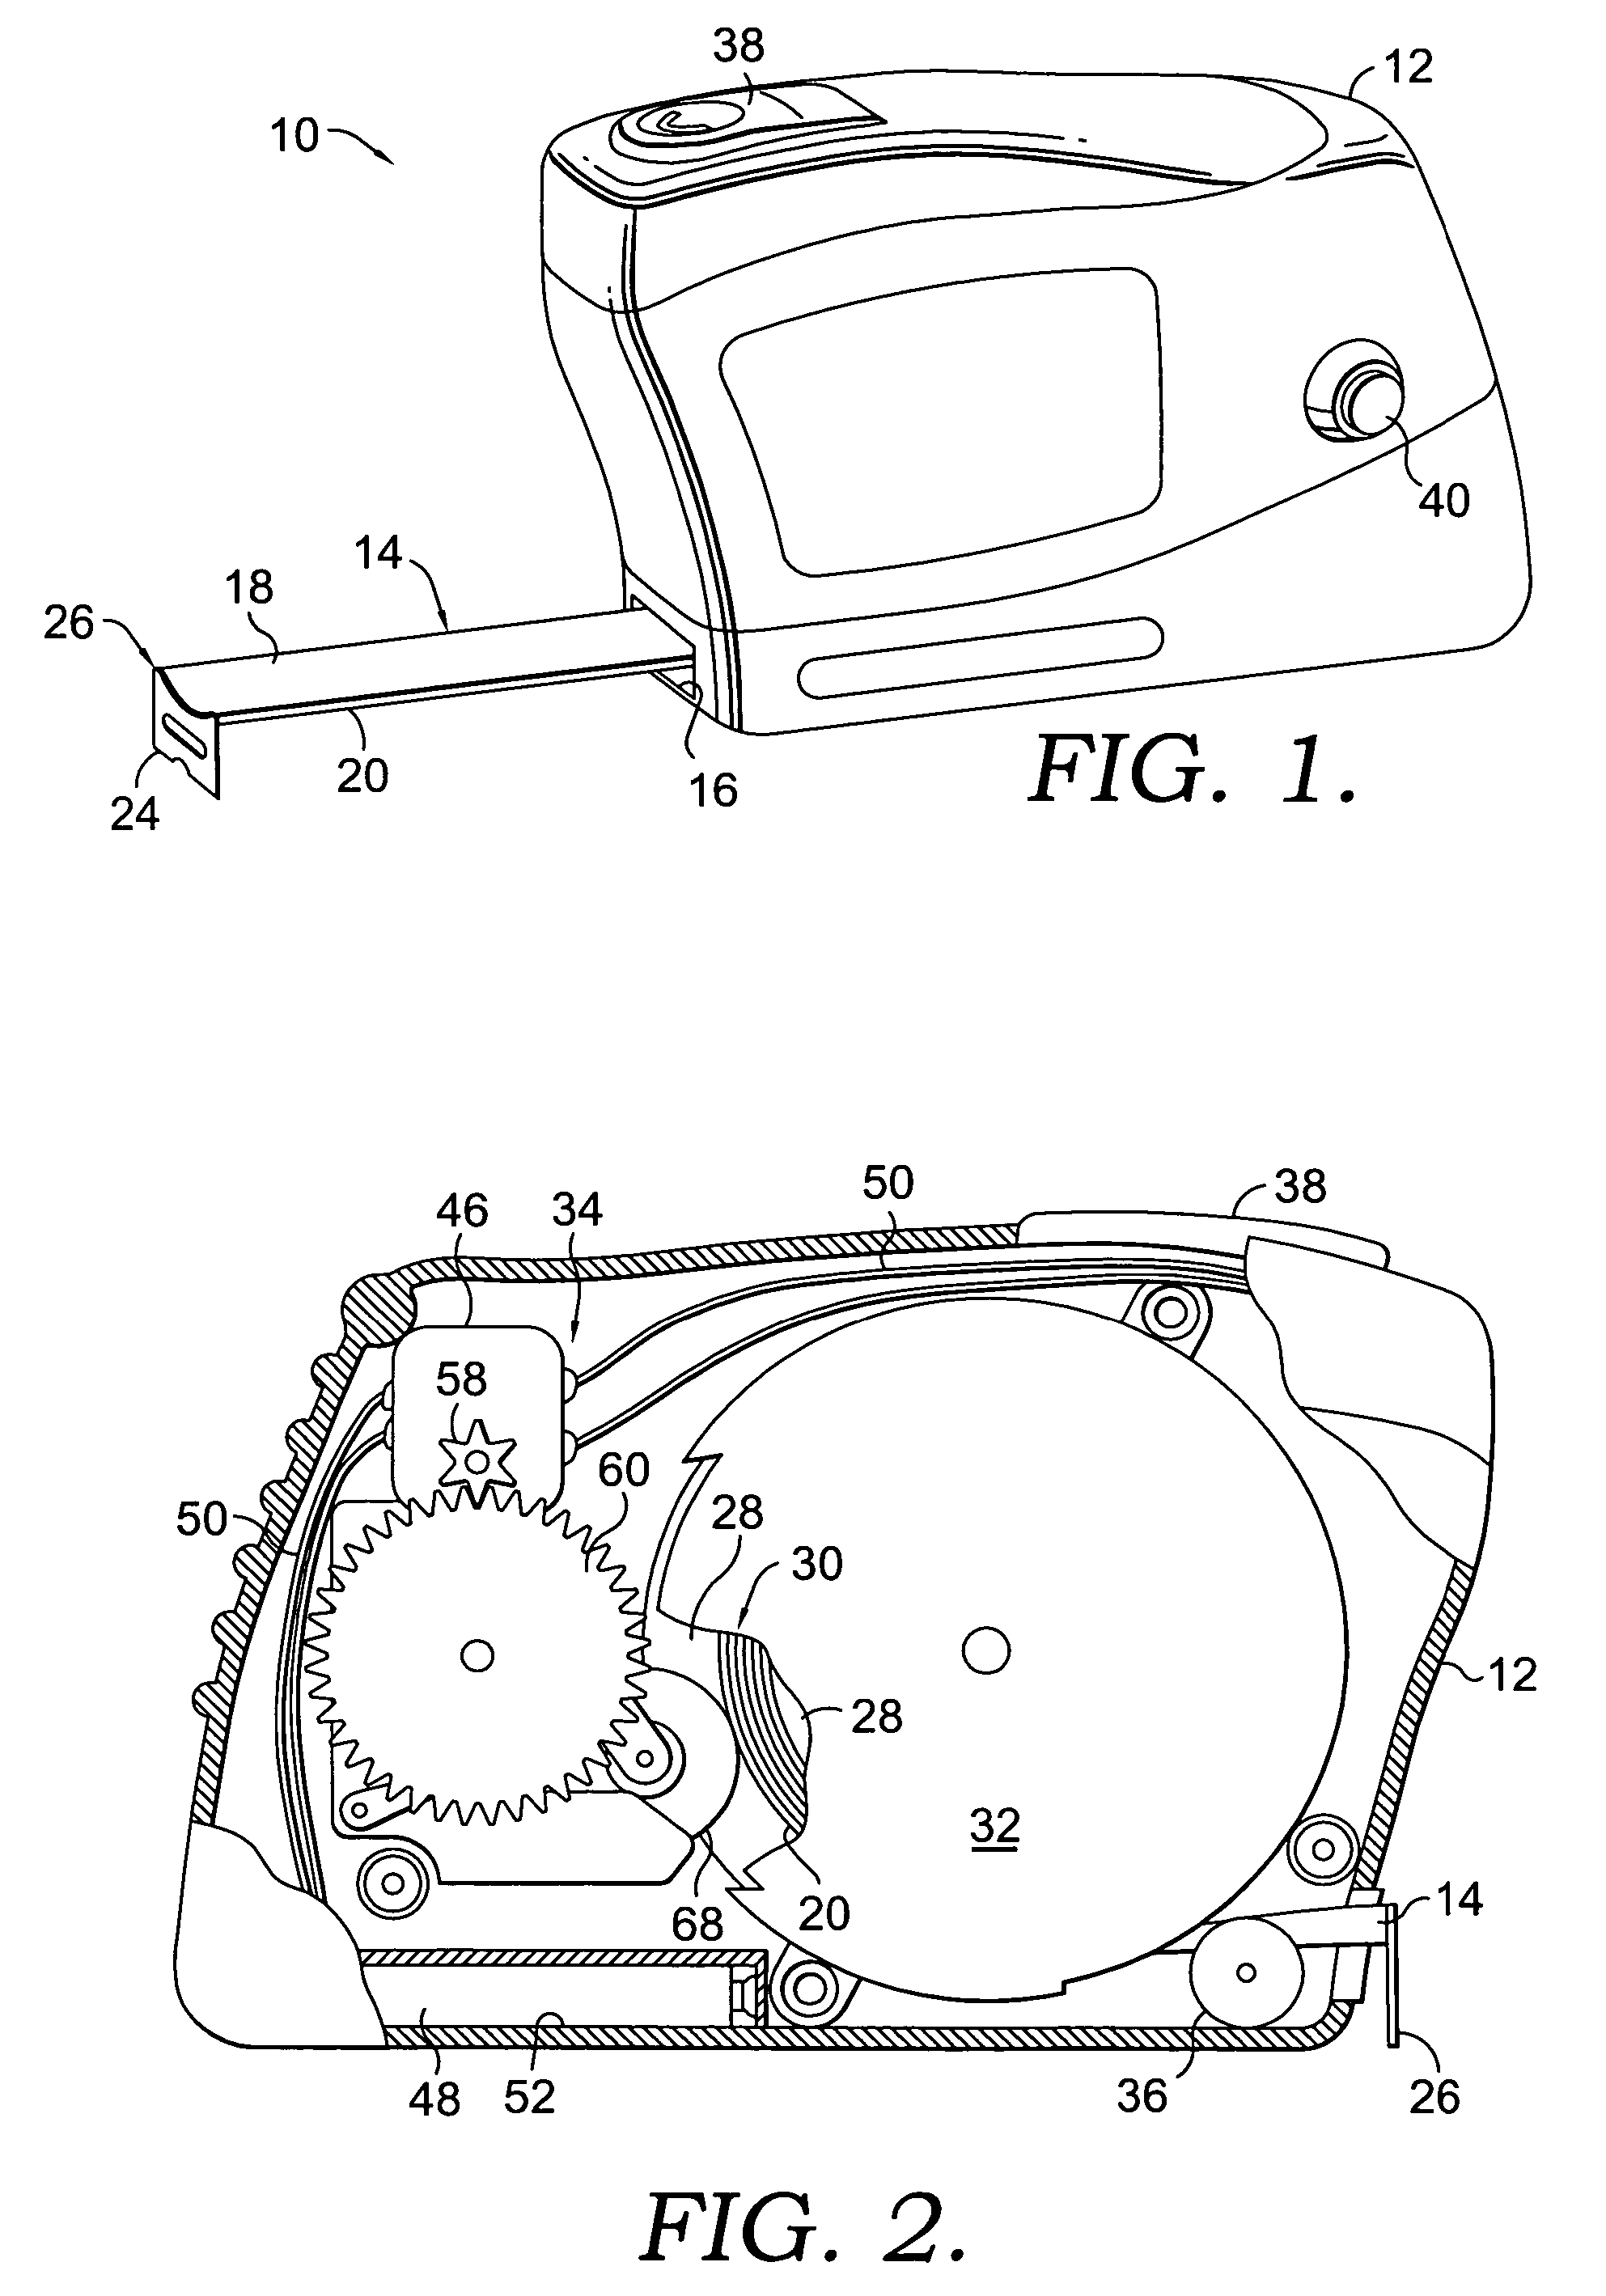 Tape measure utilizing mechanical decoupling of power tape extension feature for tape retraction